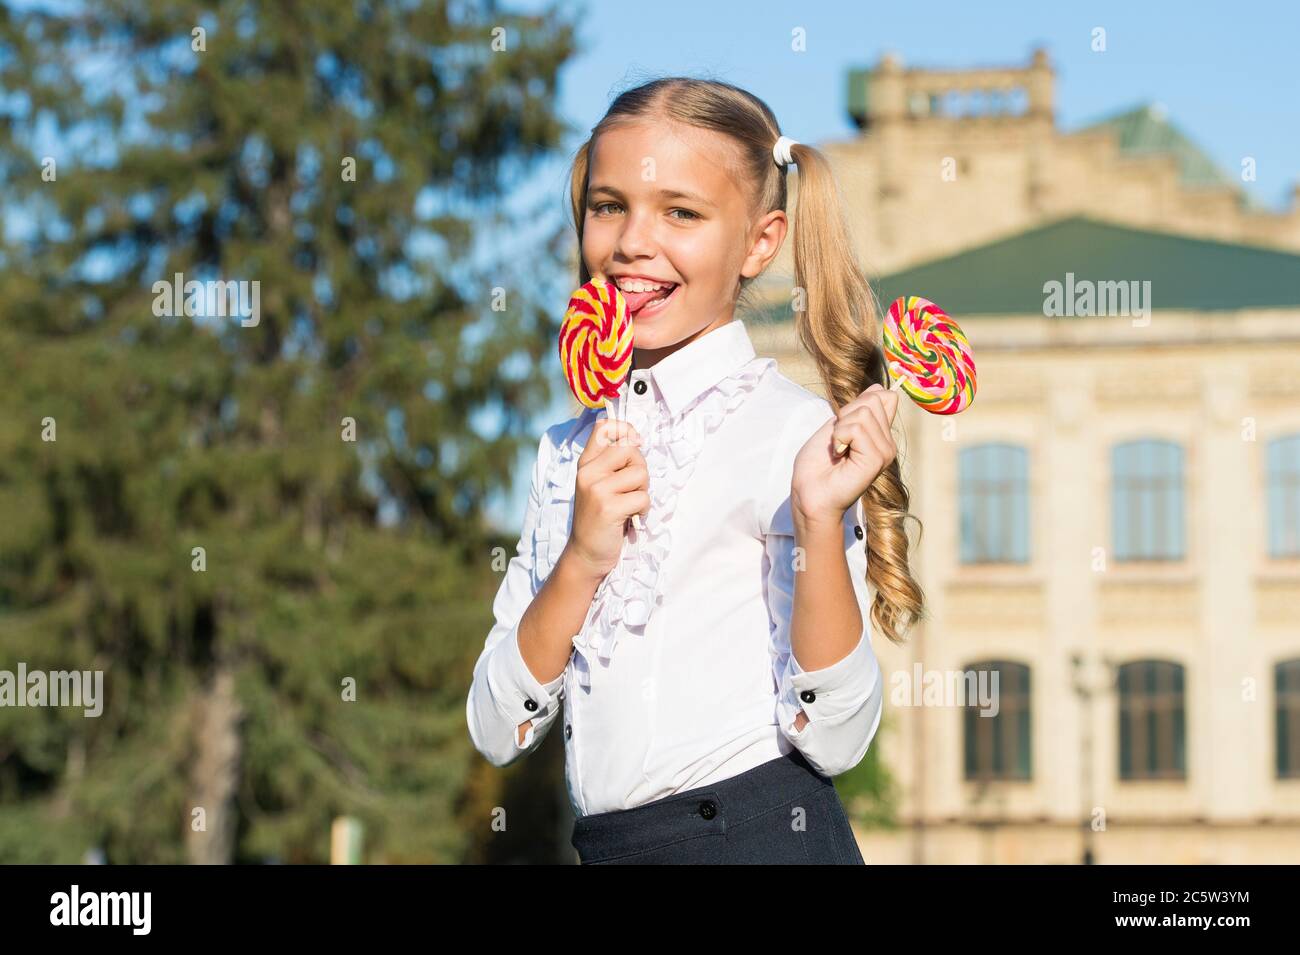 Candy makes mouth happy. Little girl lick candy sunny outdoors. Candy shop. Lollipop or sucker. Sugary treat. Confectionary. Food and snack. Sweet world. You deserve a candy today. Stock Photo